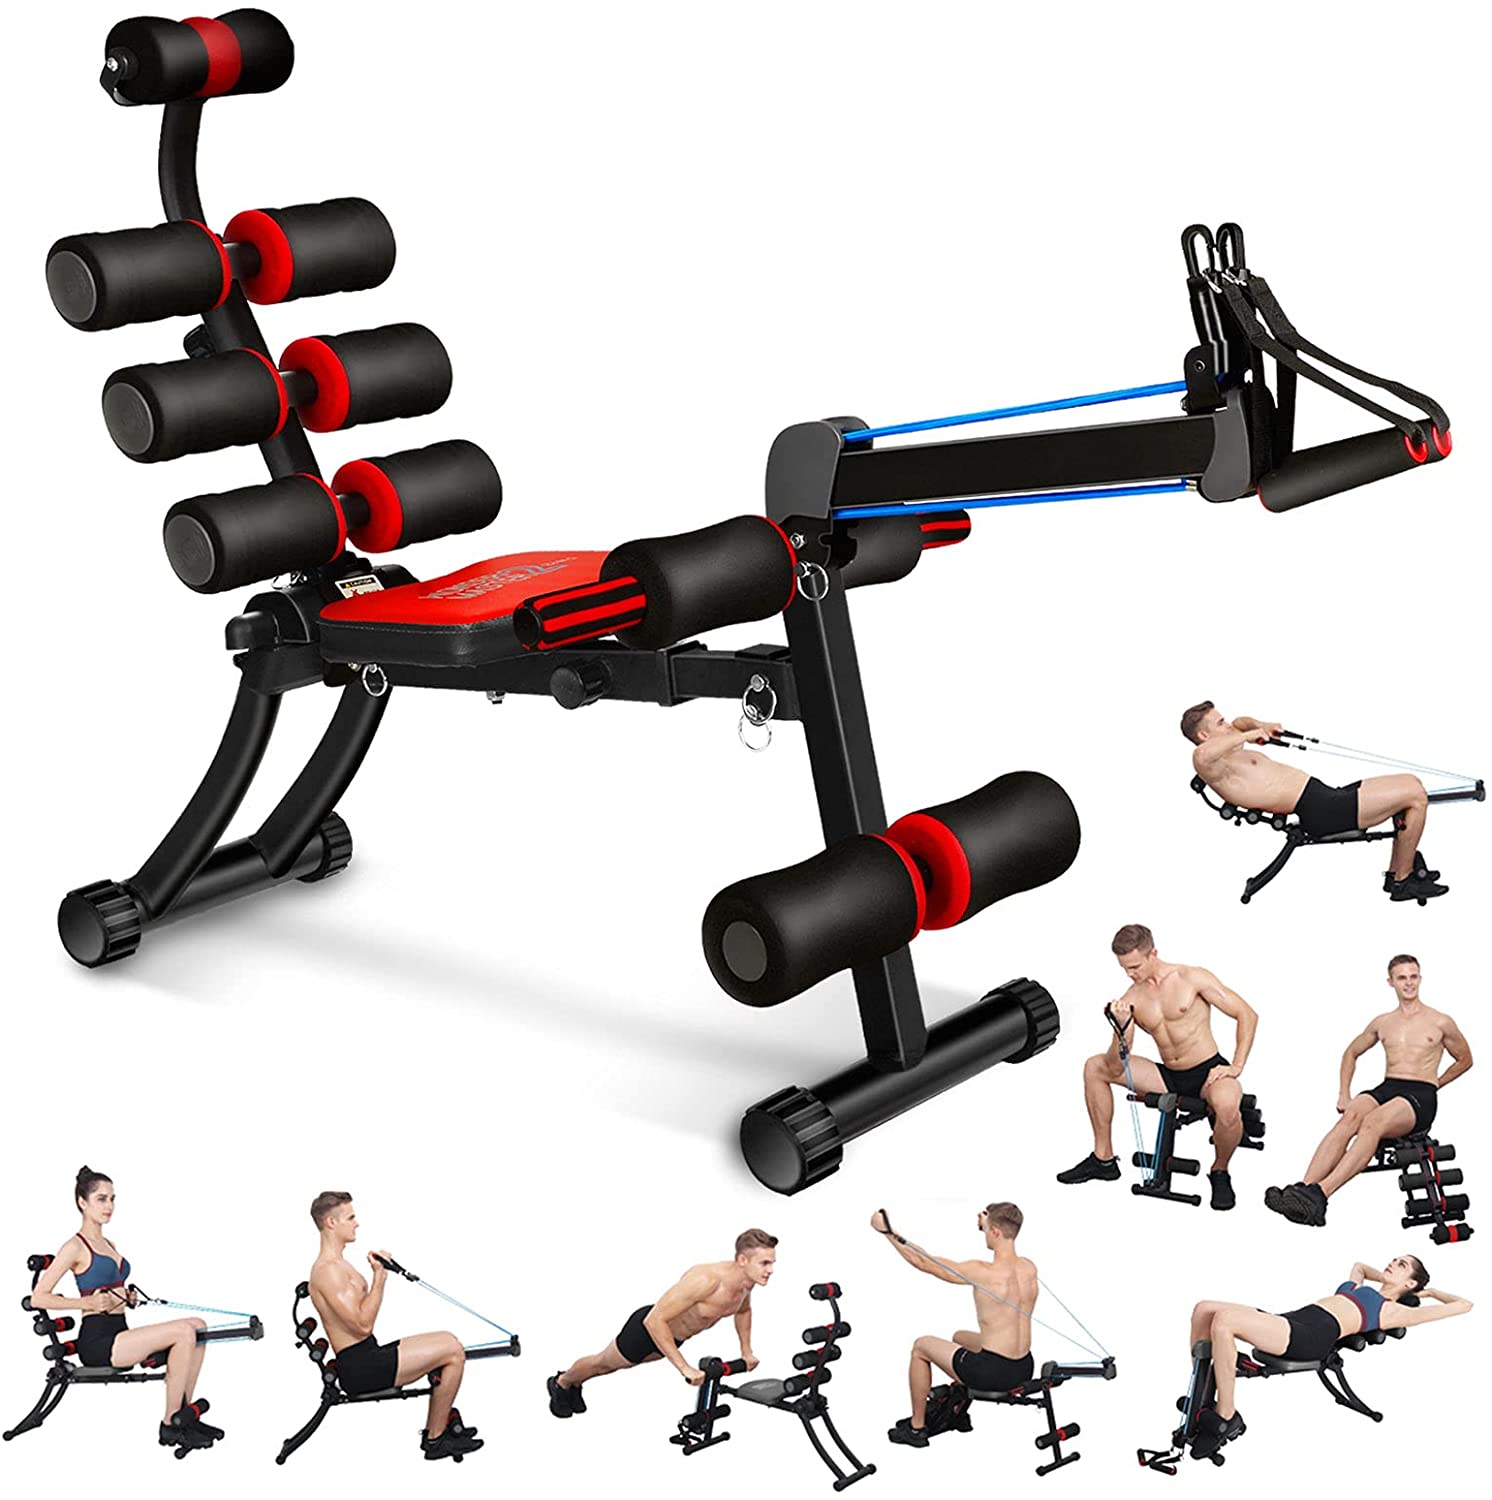 Household Abdominal Exercise Machine Foldable Fitness Equipment Home Gym workout 